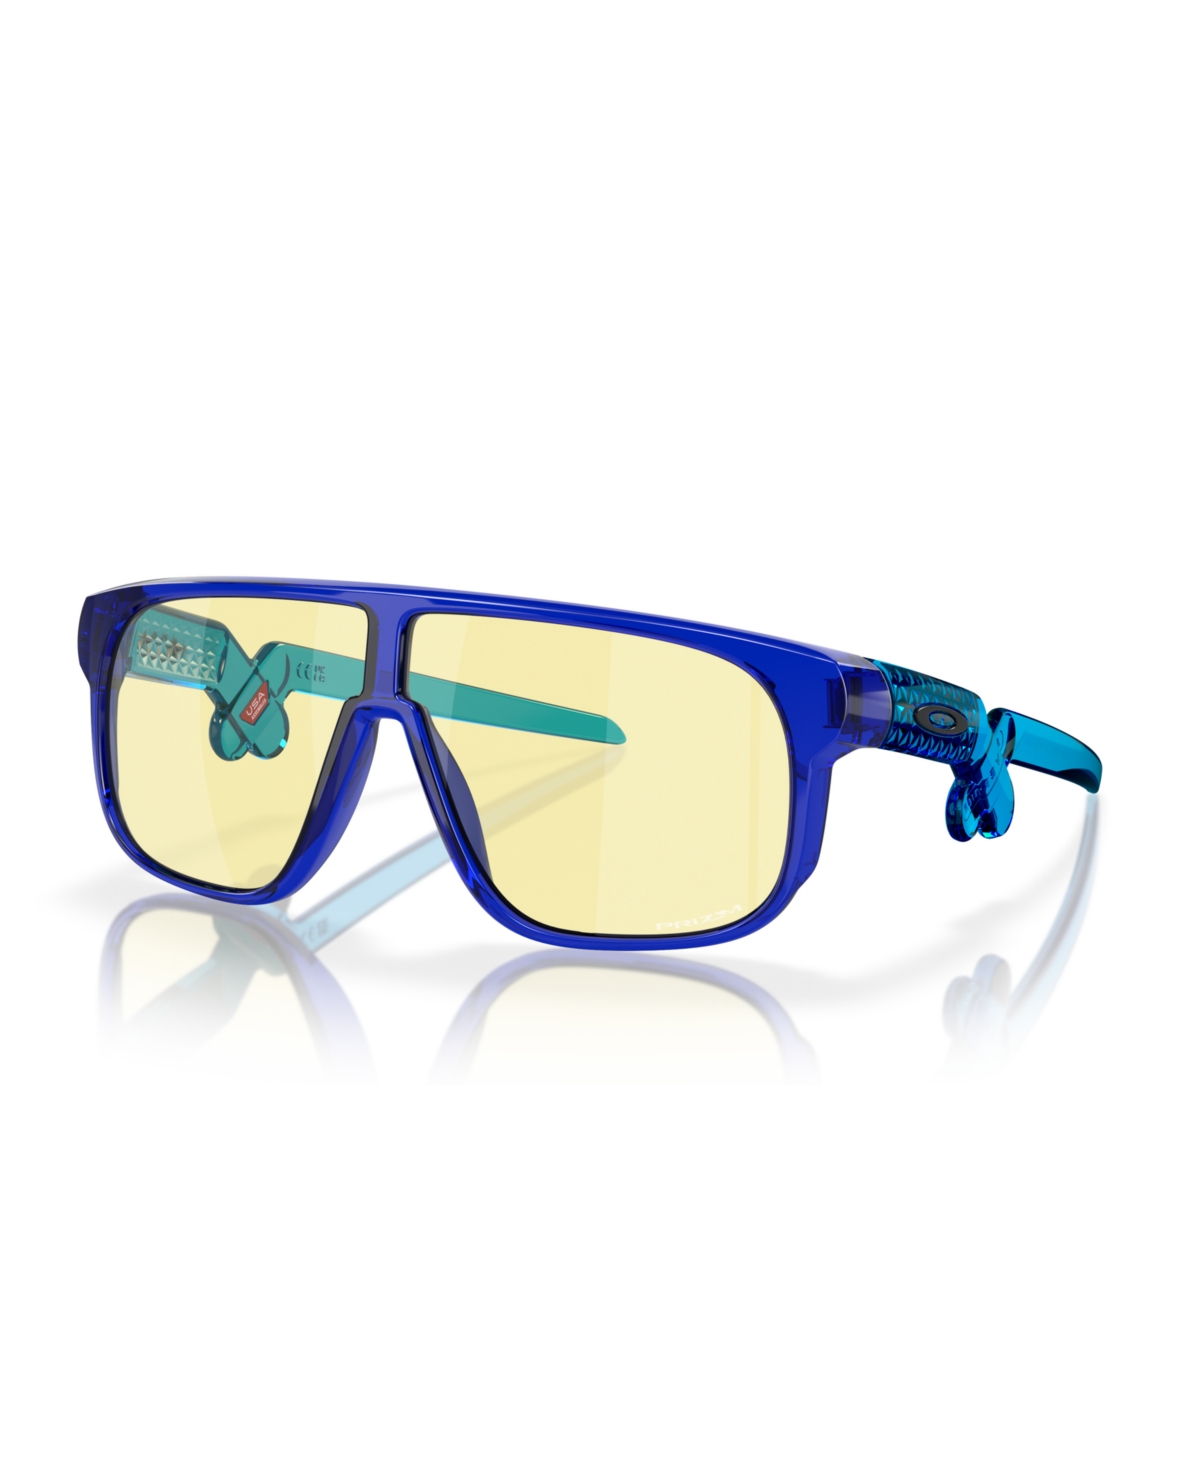 Oakley Jr Kid's Sunglasses, Inverter Youth Fit Gaming Collection Oj9012 In Crystal Blue